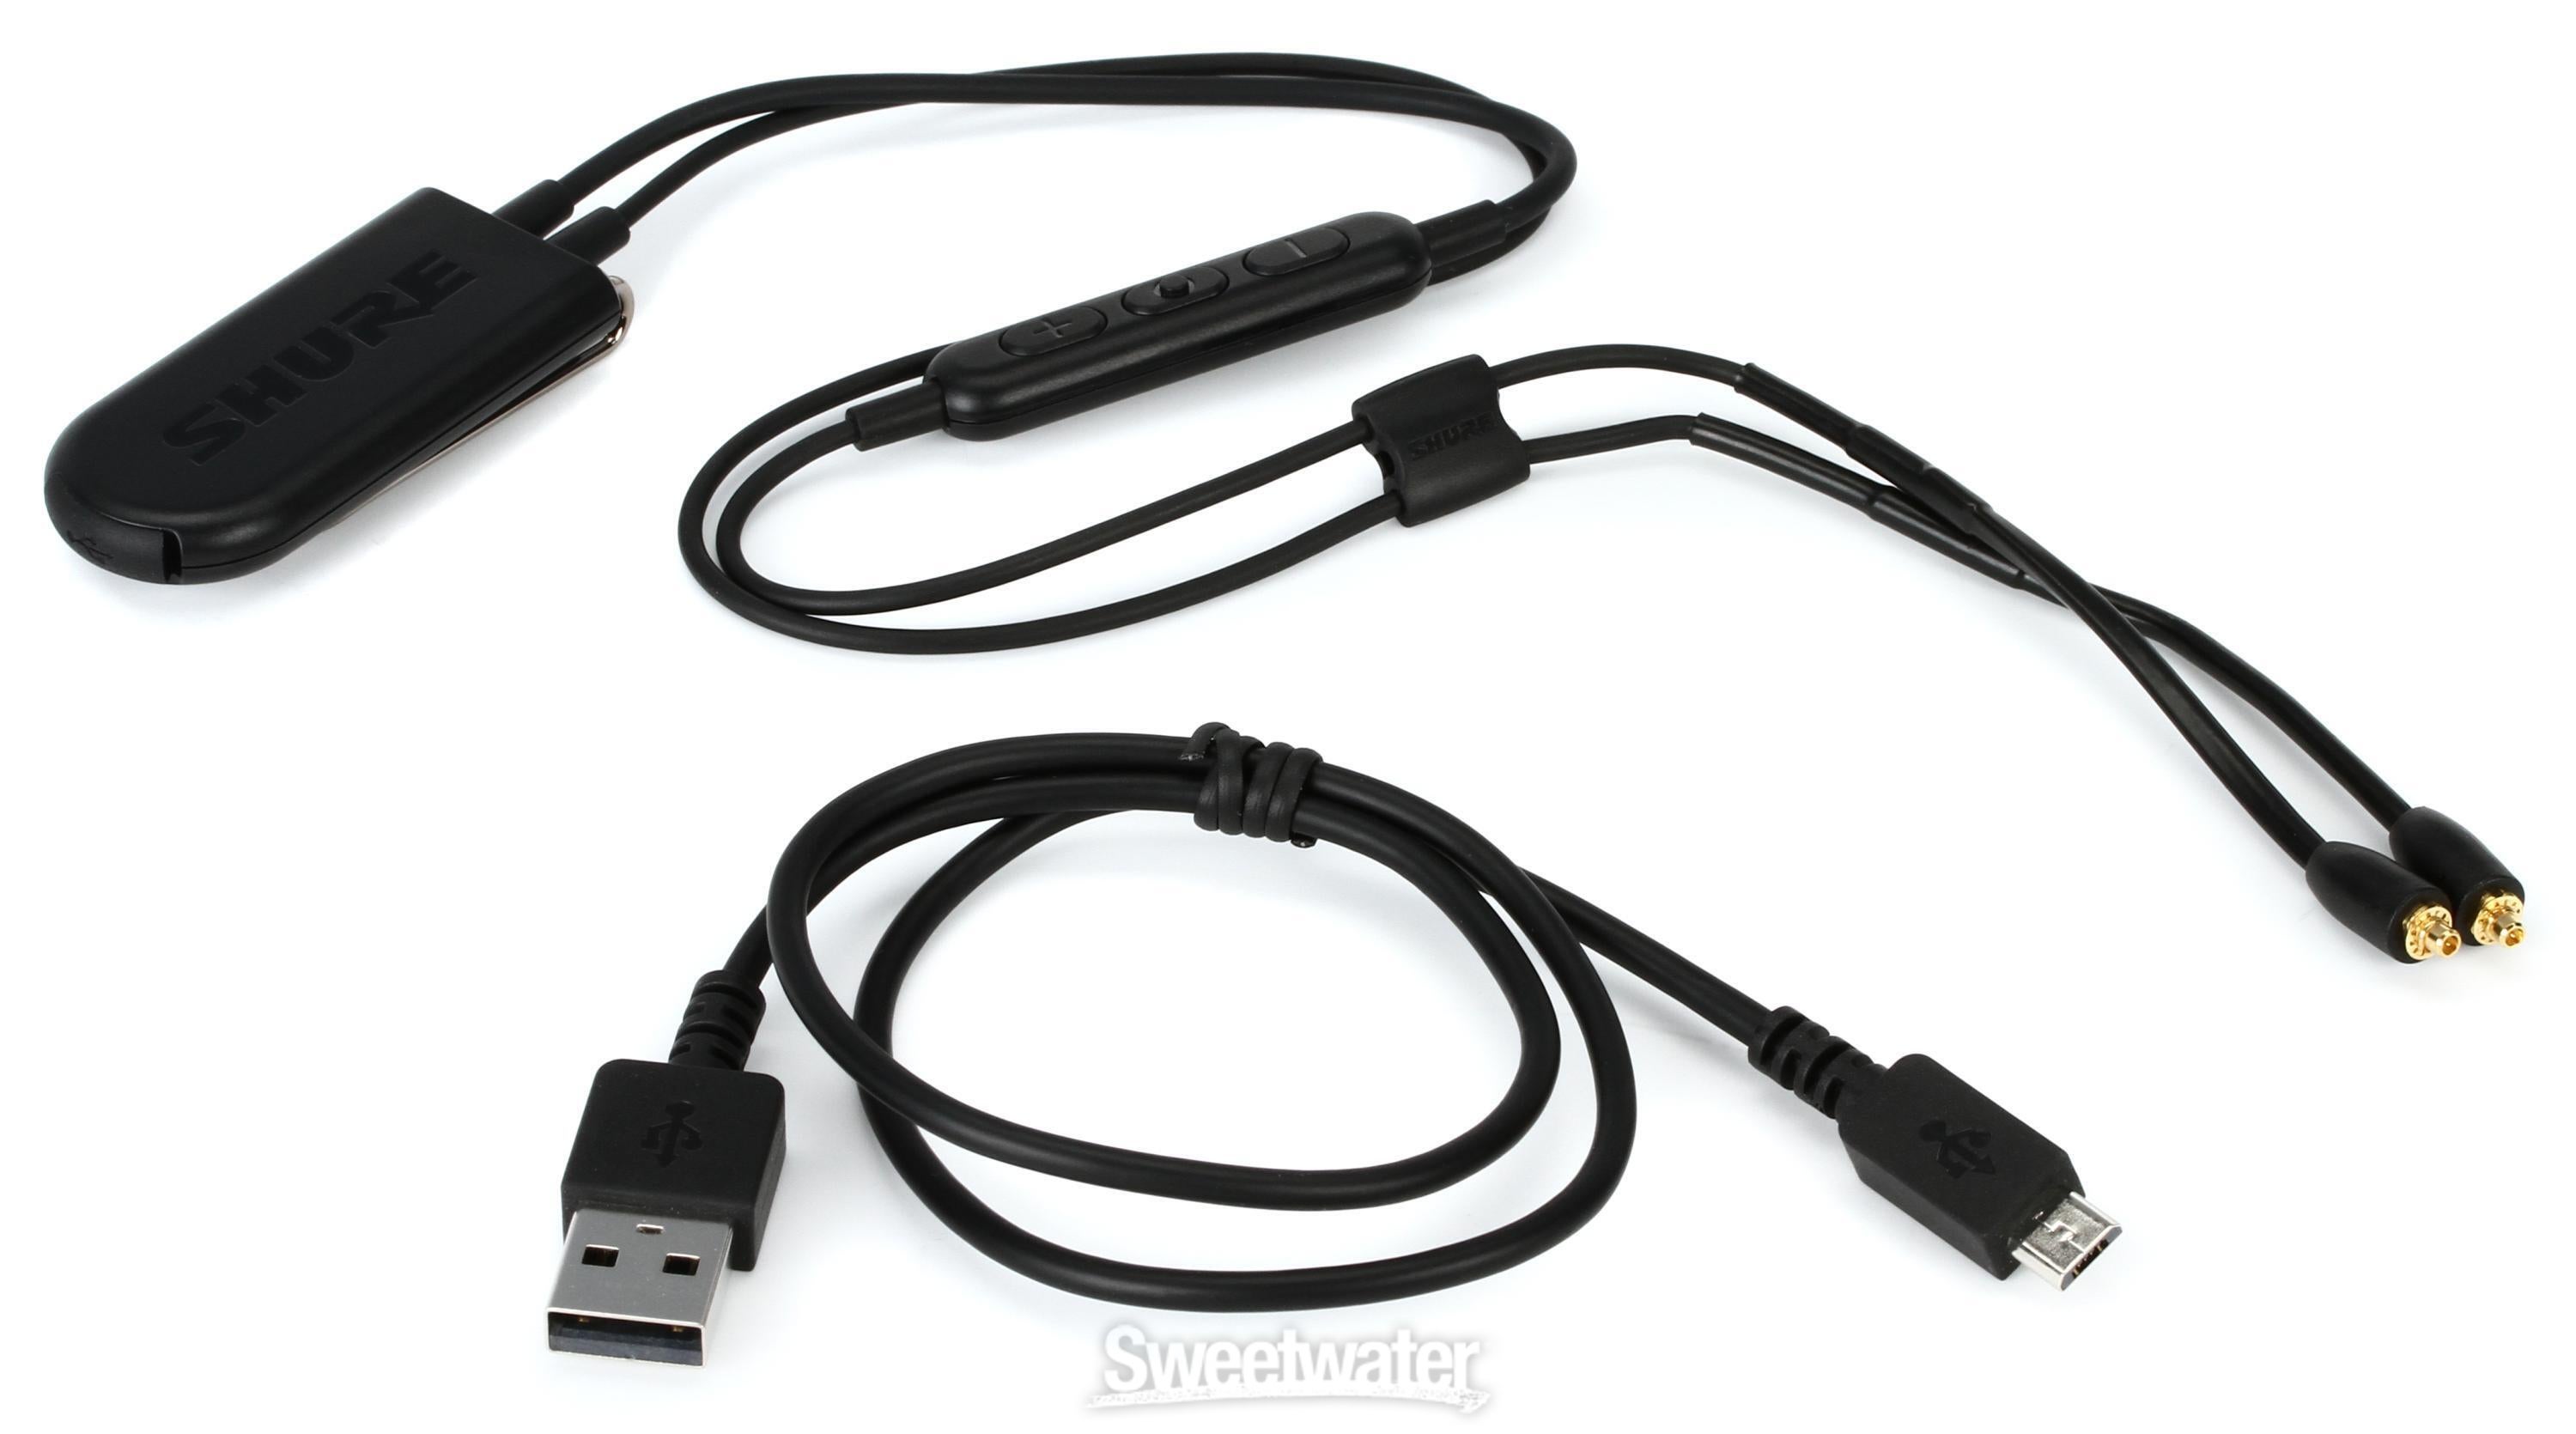 Shure Bluetooth 5.0 Earphone Communication Cable | Sweetwater